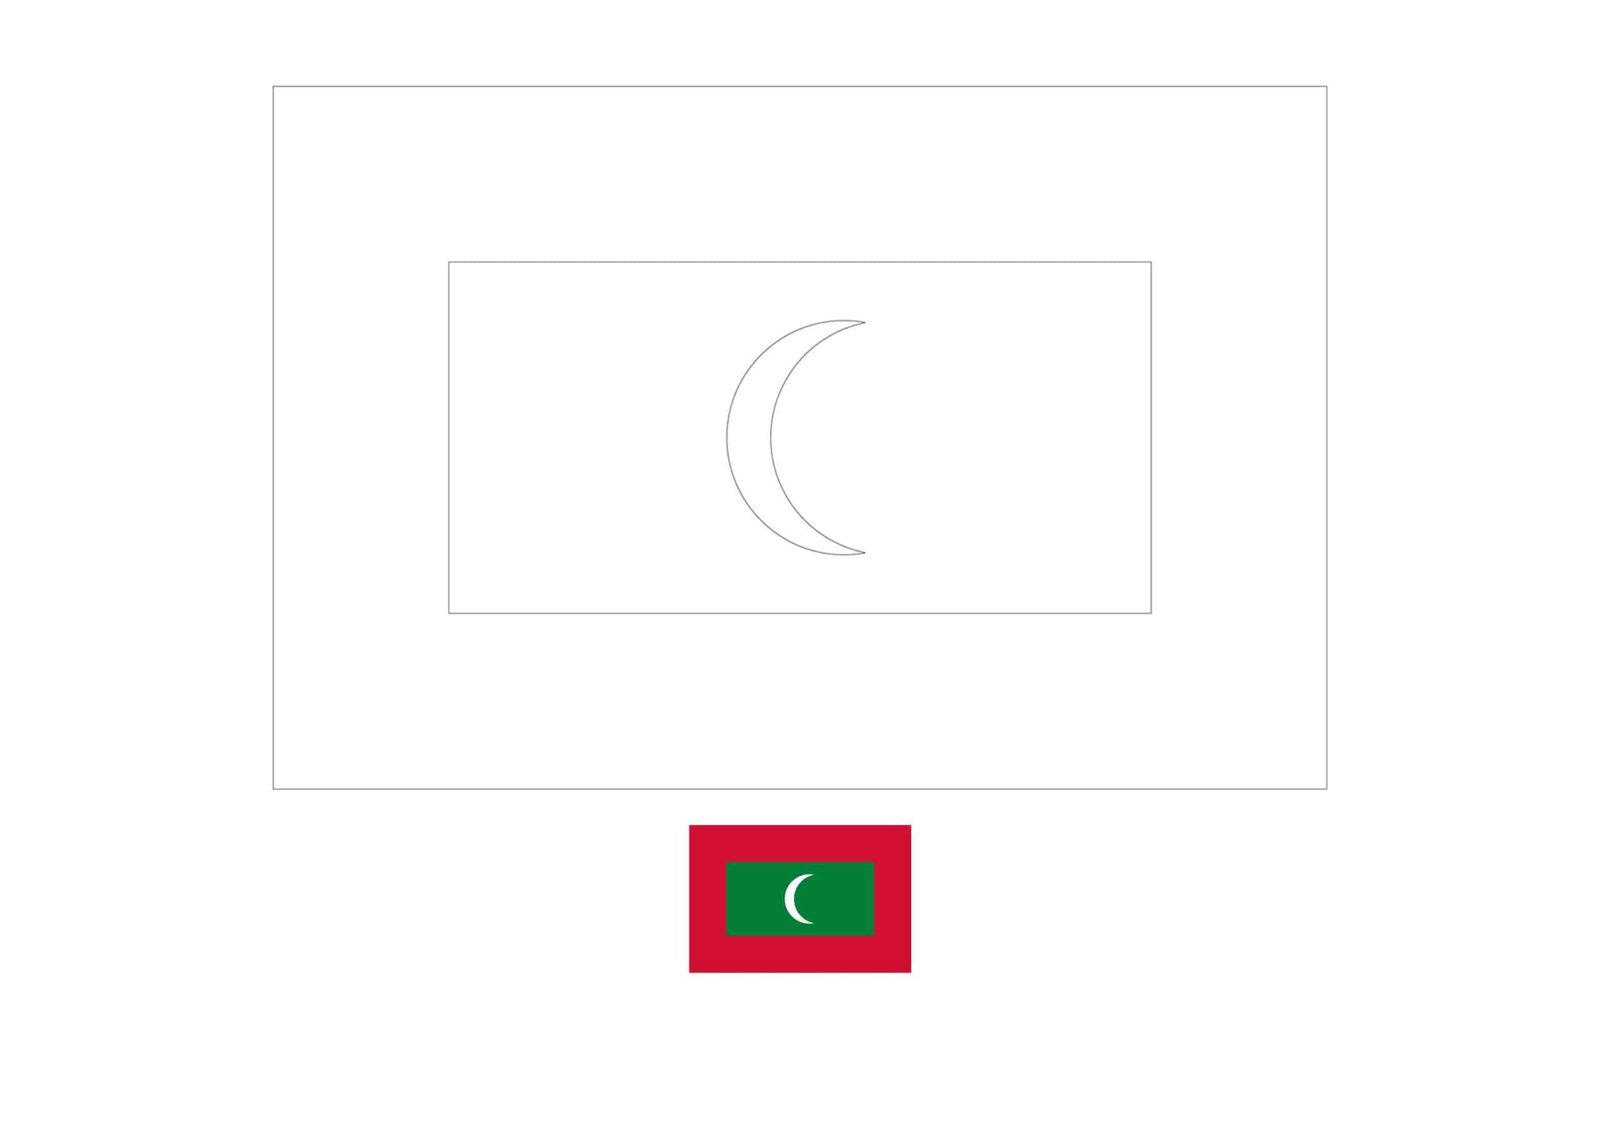 Maldives flag coloring page with a sample